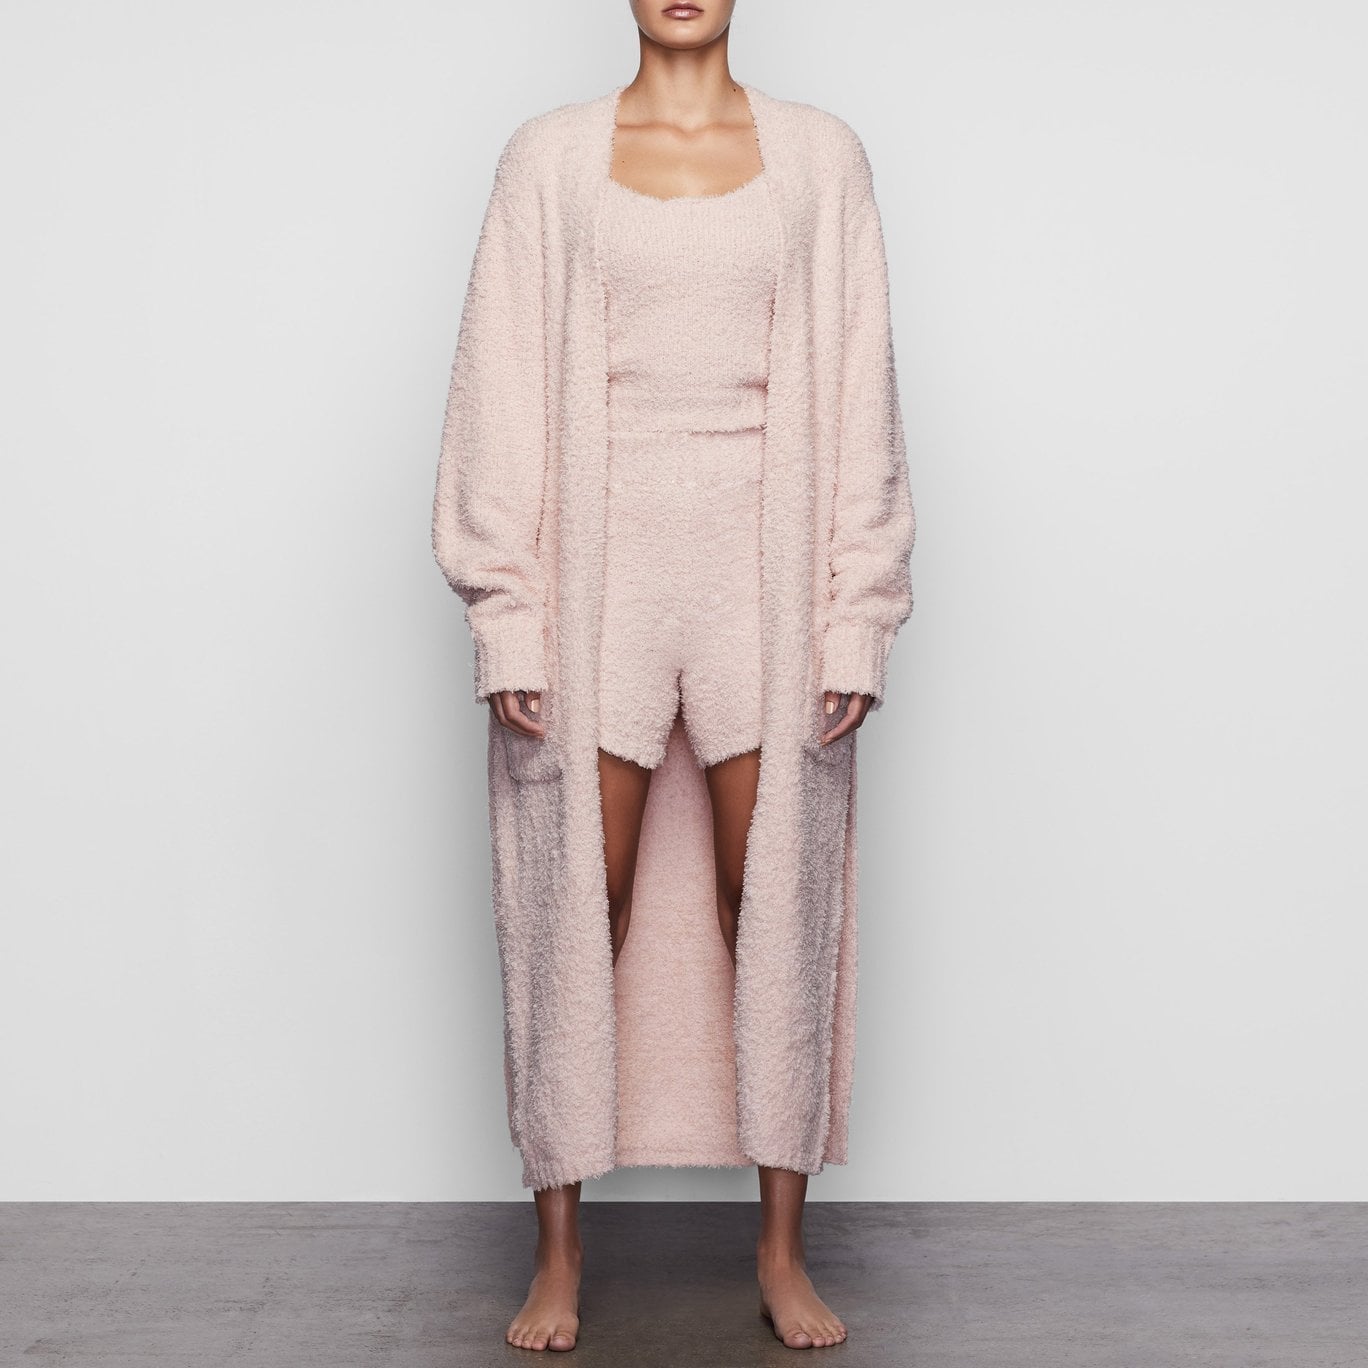 SKIMS - BACK IN STOCK! The sought after Cozy Knit Robe is